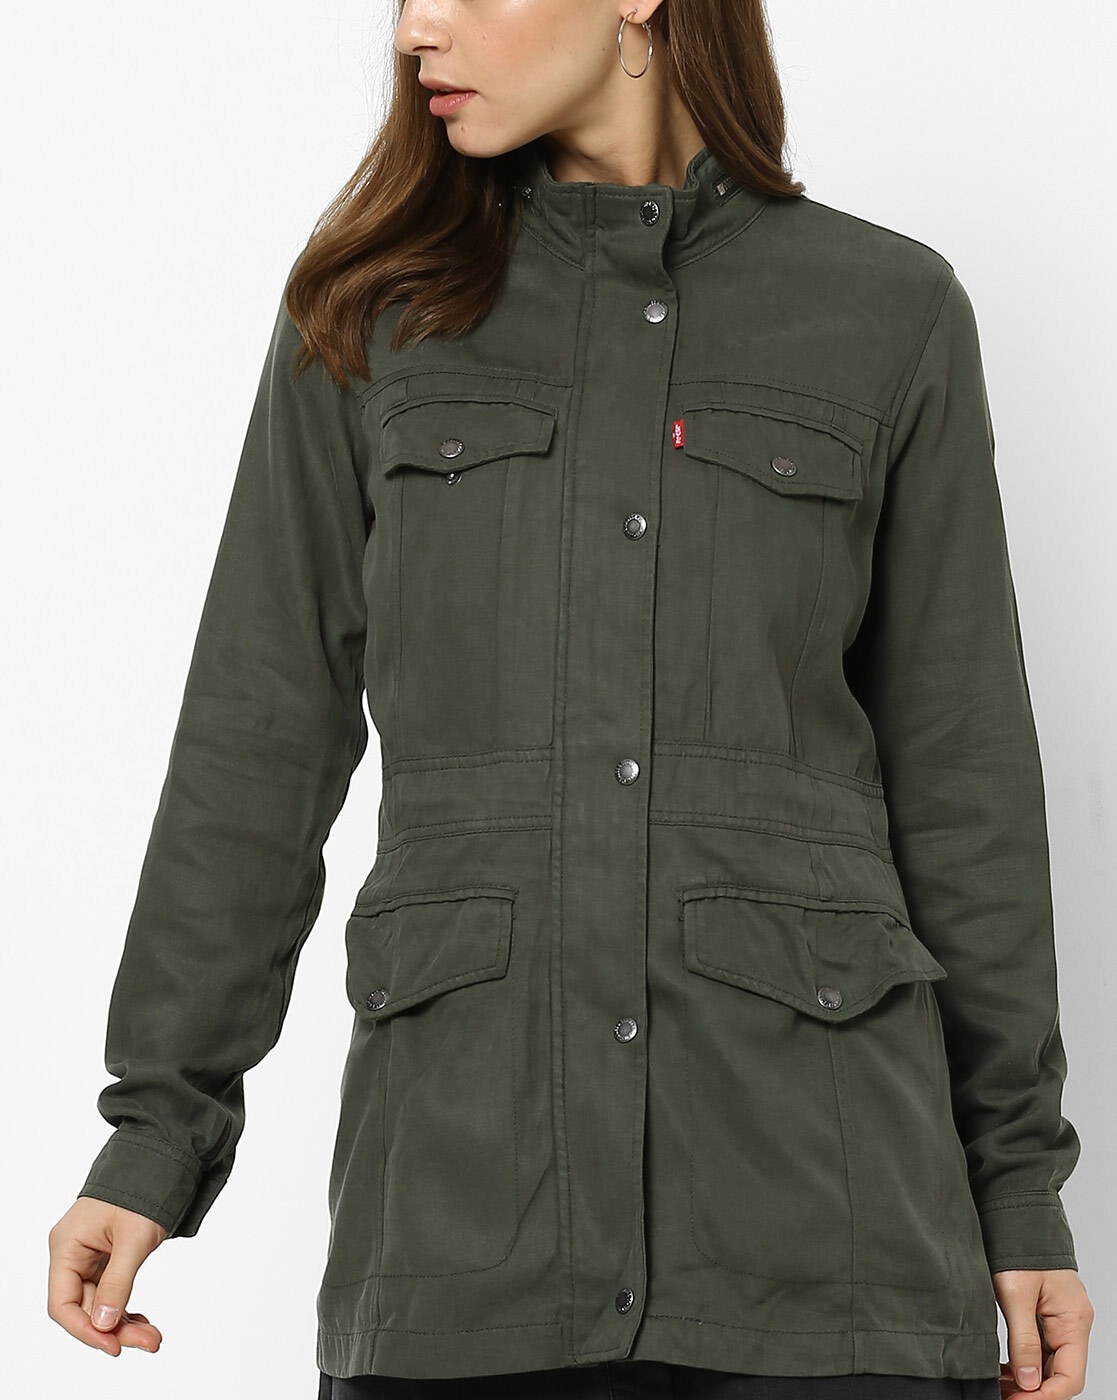 Buy Olive Green Jackets & Coats for Women by LEVIS Online 